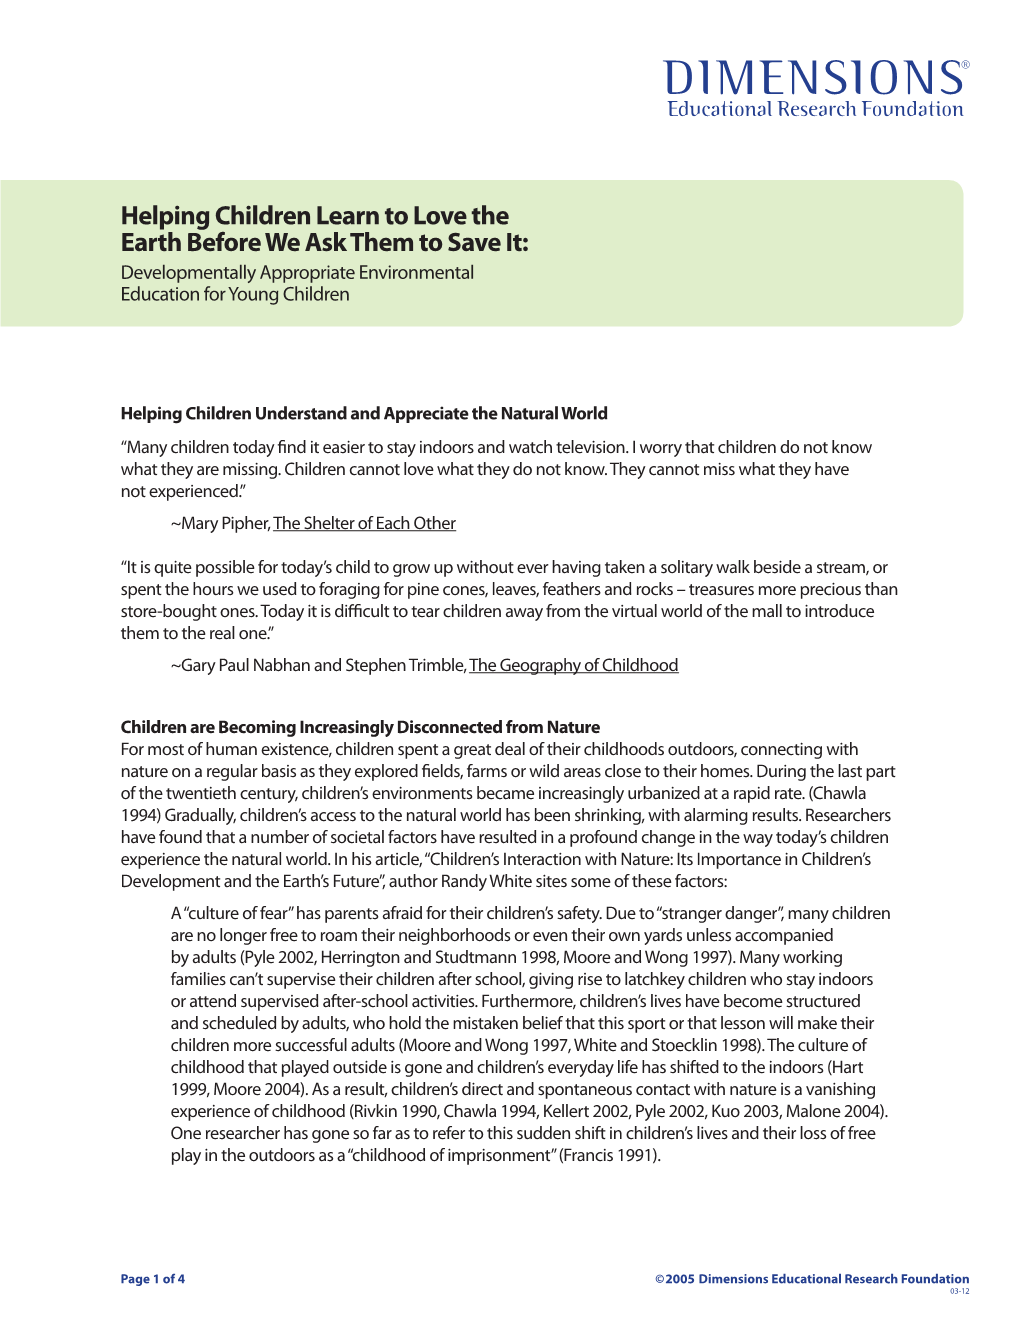 Helping Children Learn to Love the Earth Before We Ask Them to Save It: Developmentally Appropriate Environmental Education for Young Children